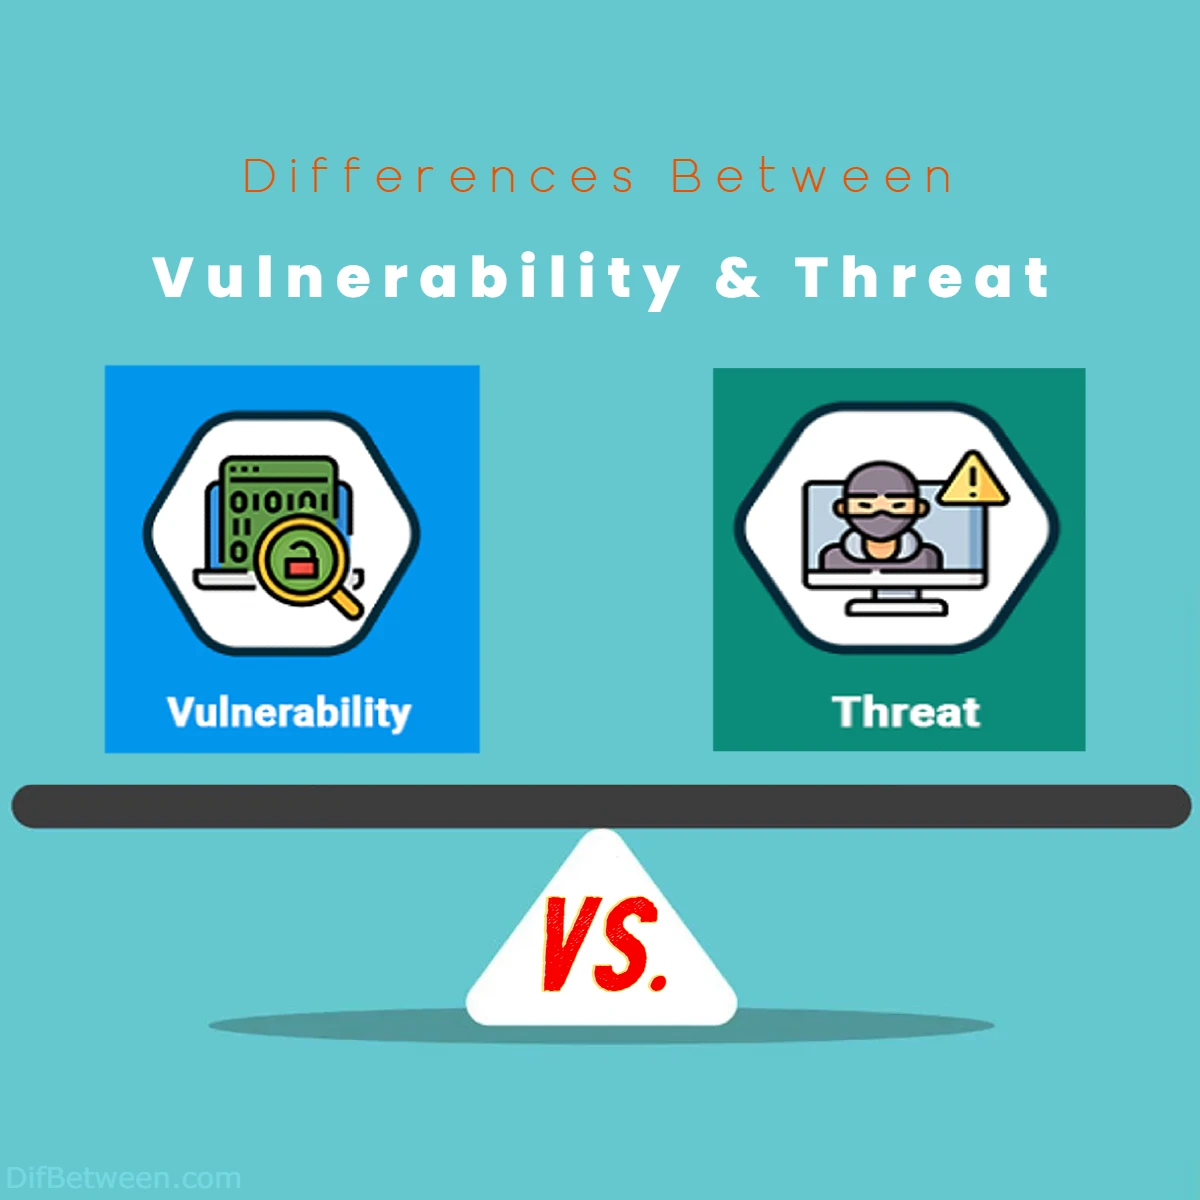 Differences Between Vulnerability vs Threat